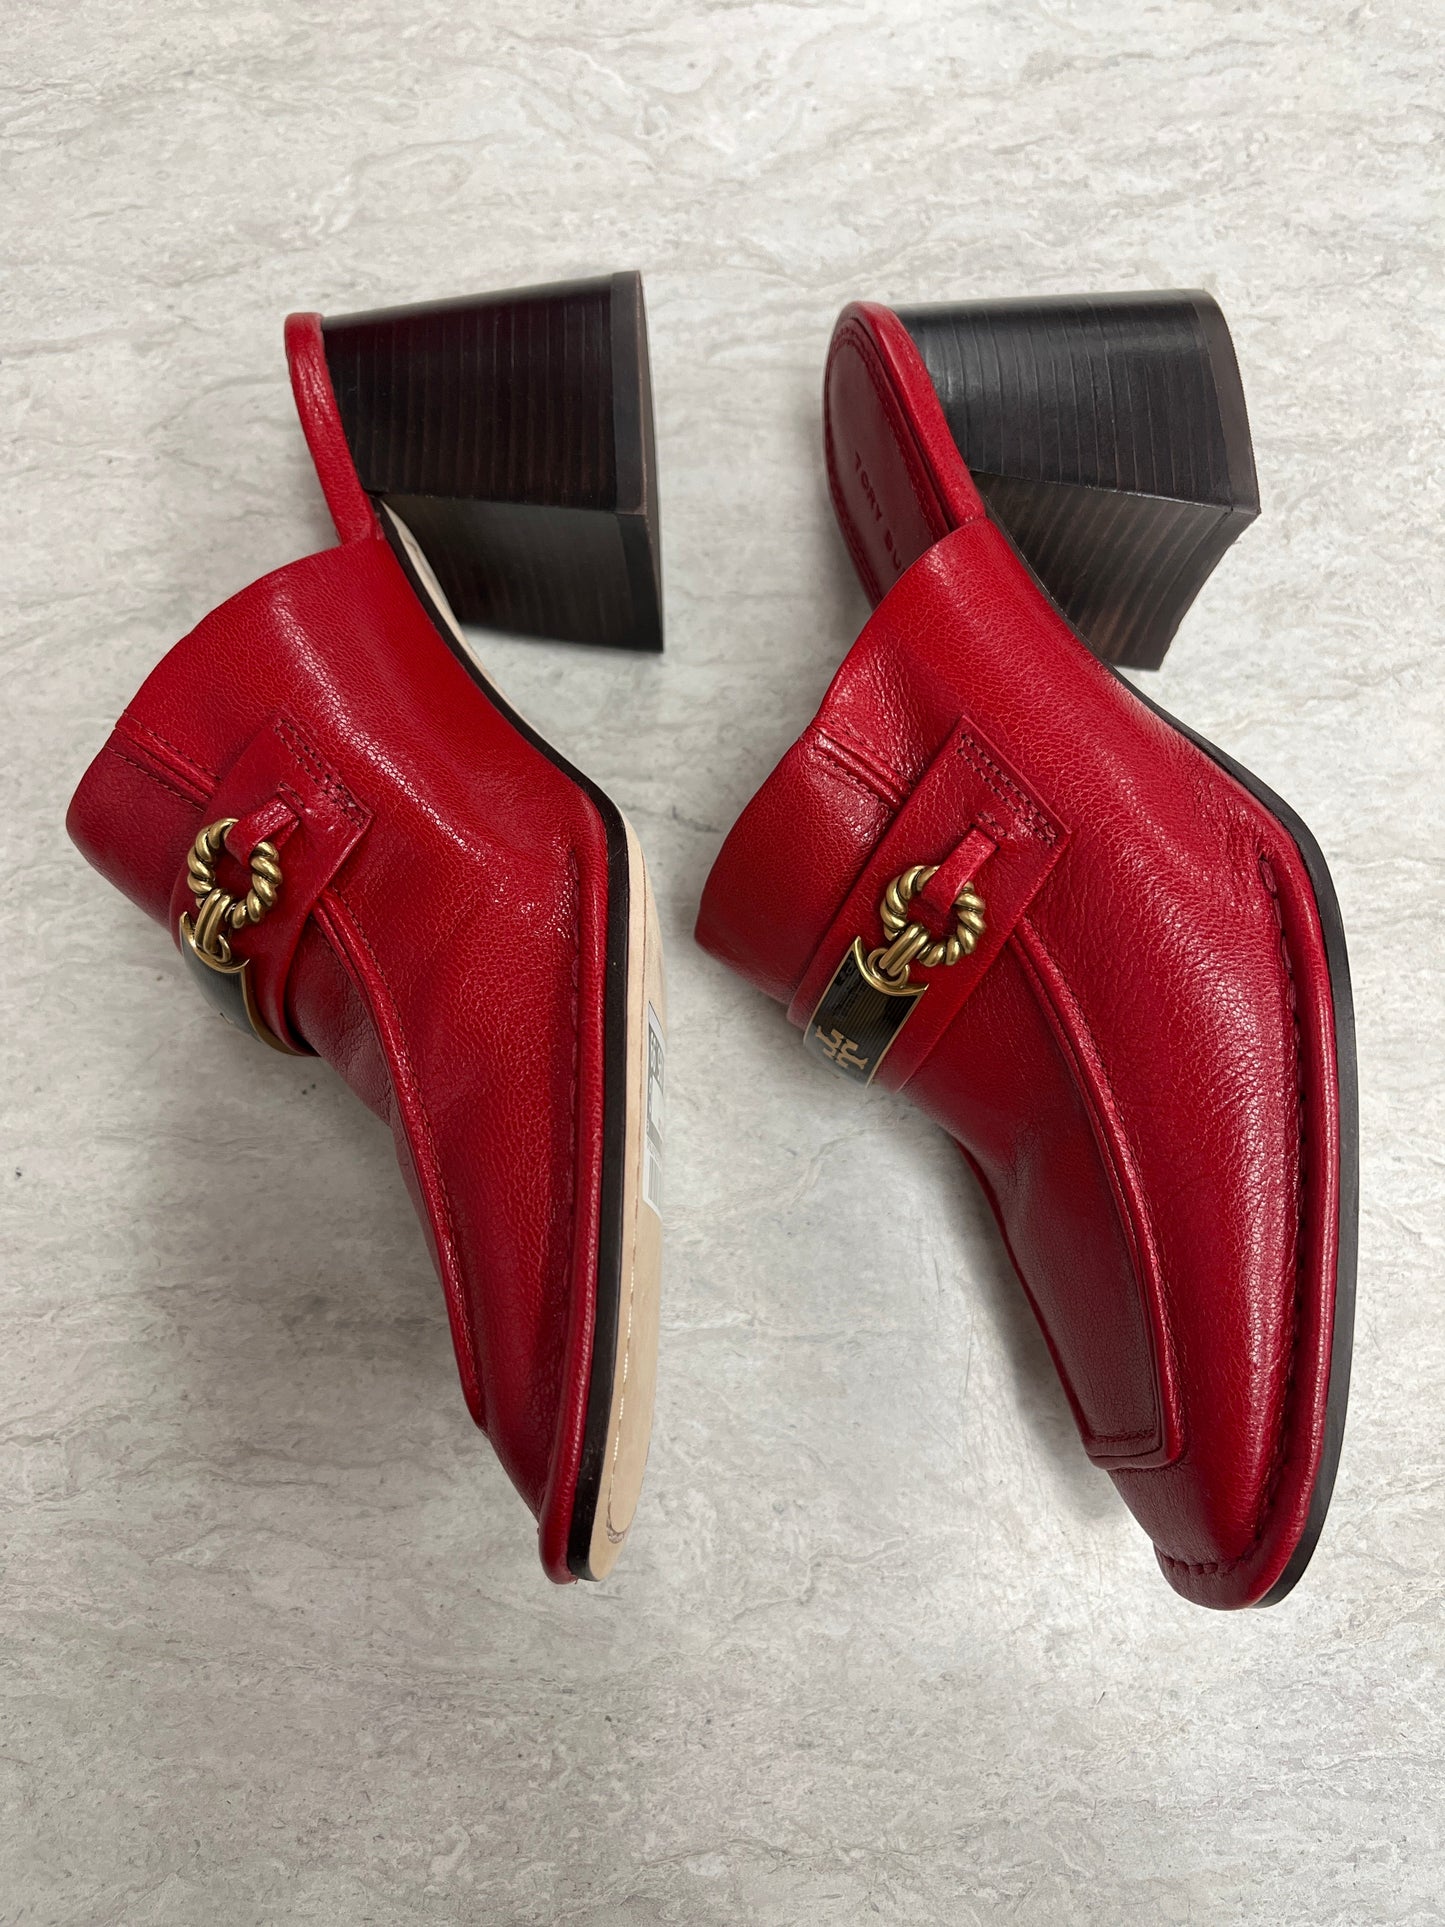 Red Shoes Heels Block Tory Burch, Size 7